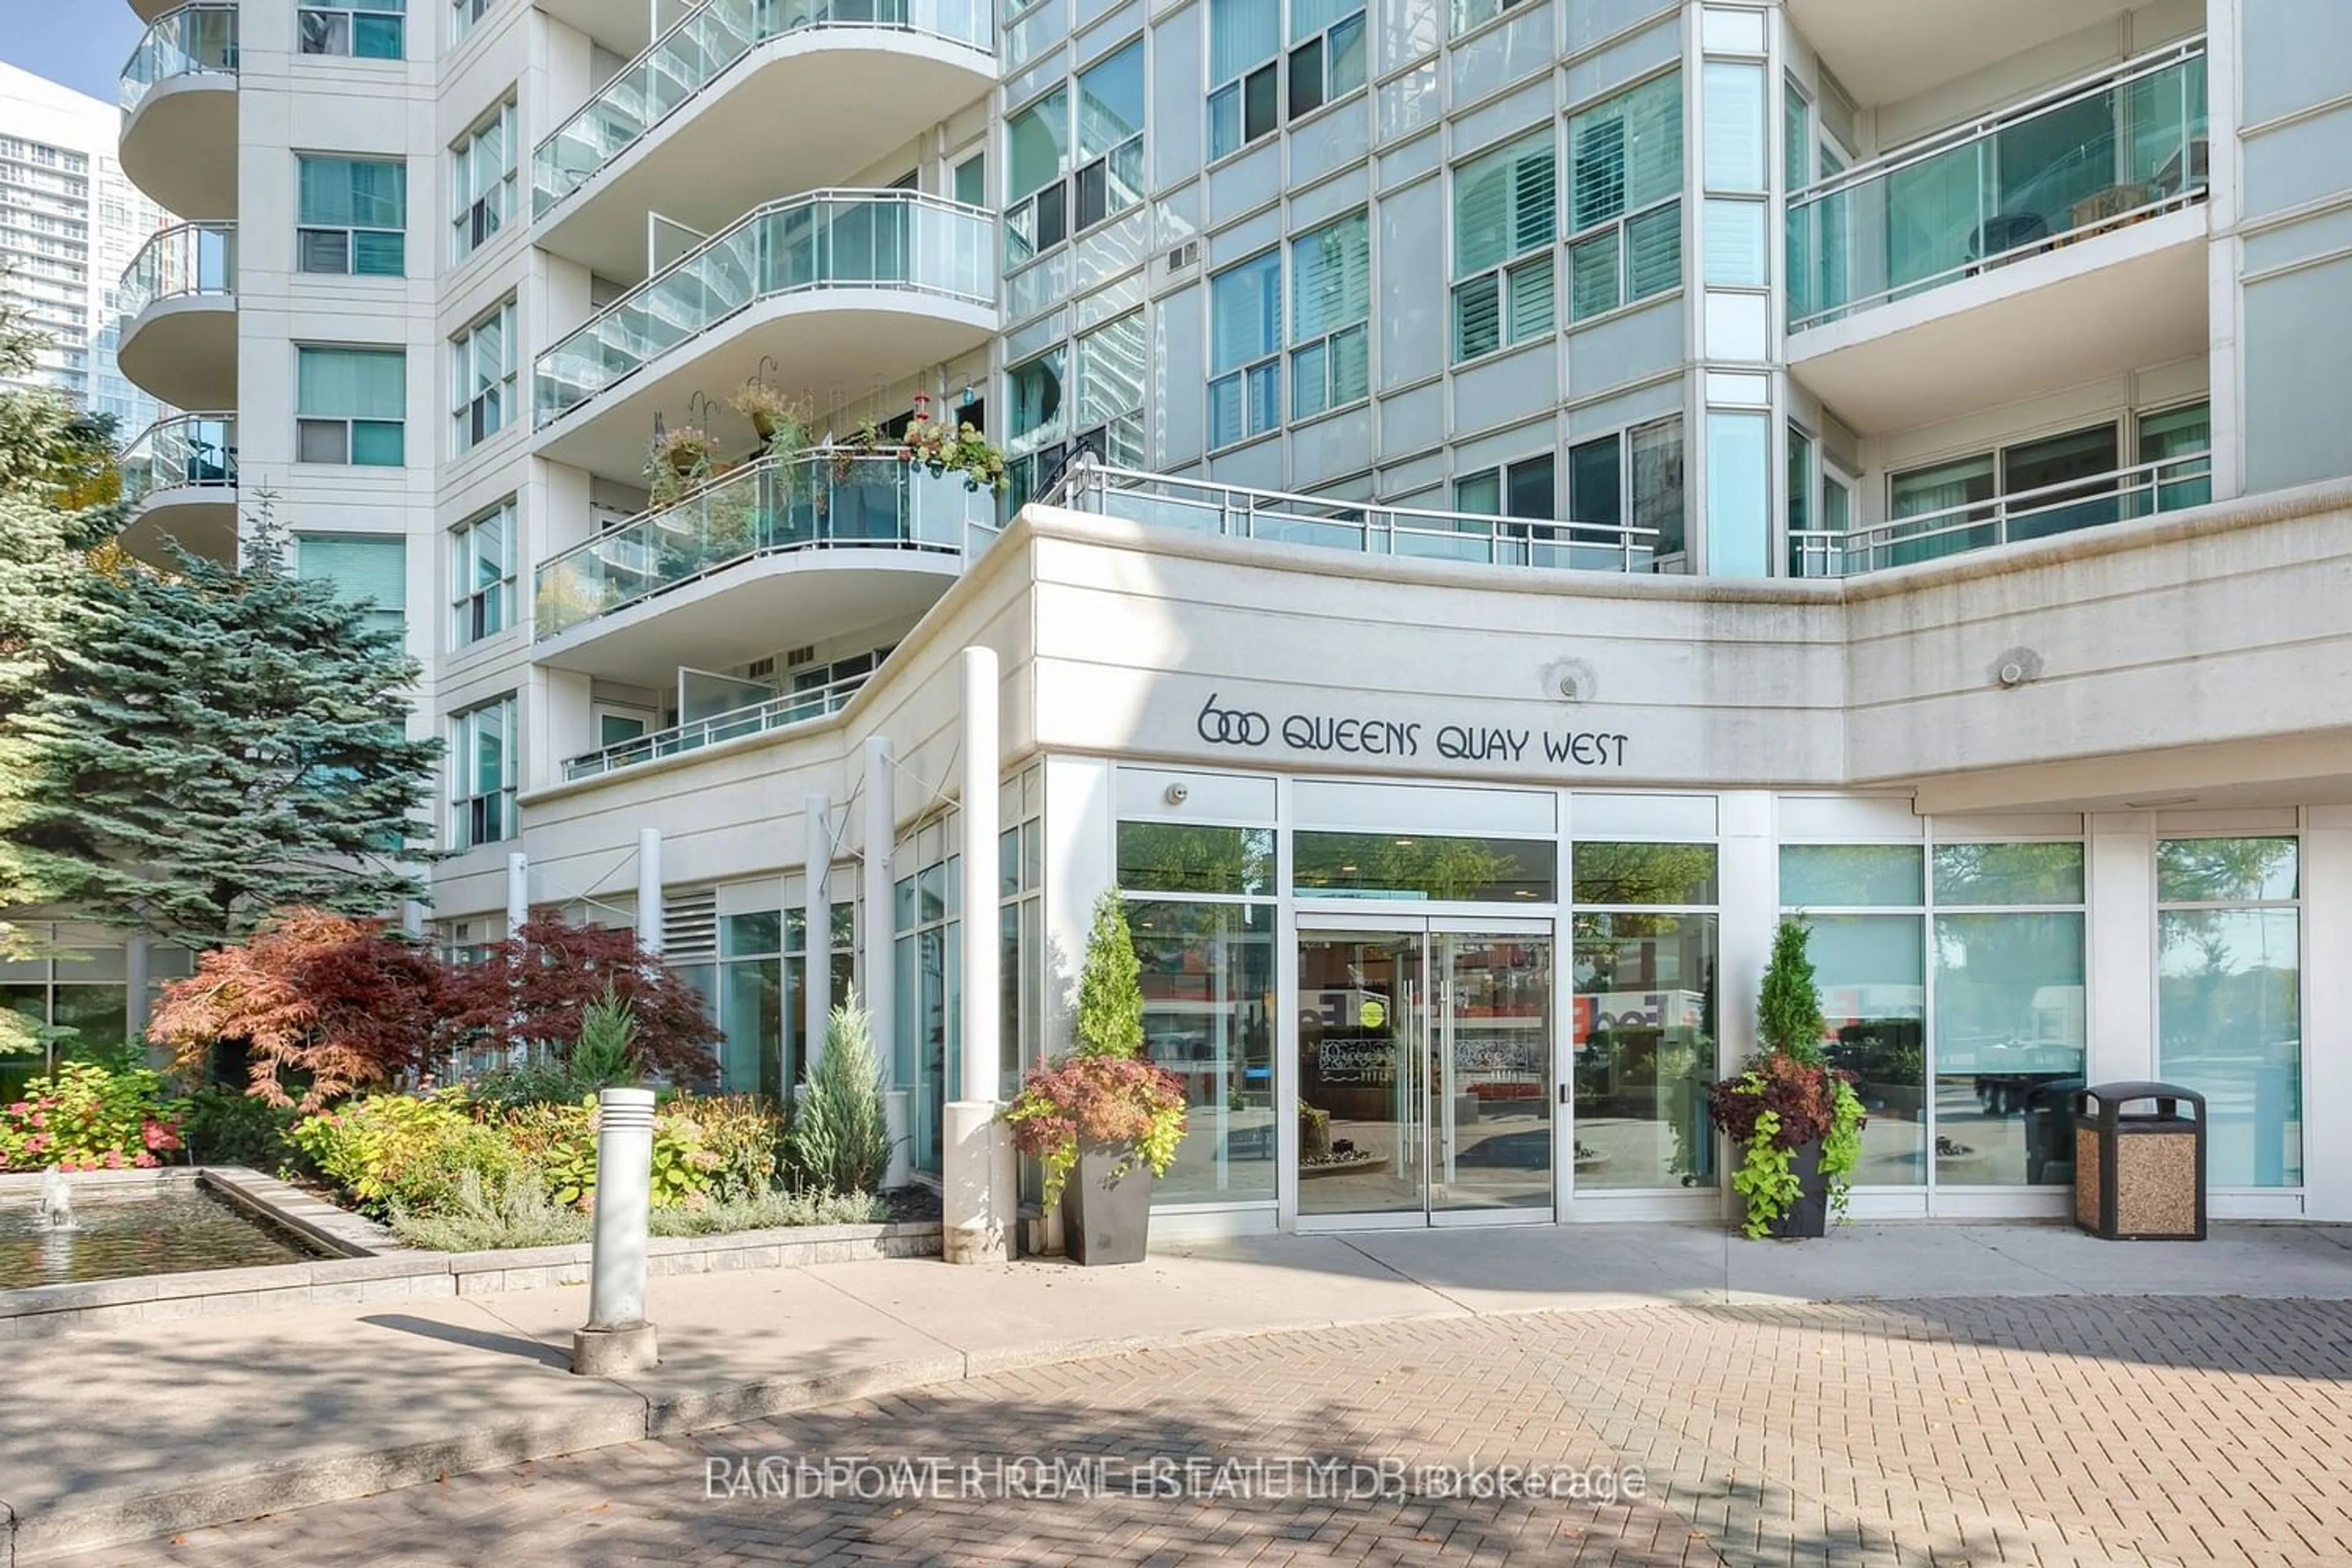 A pic from exterior of the house or condo for 600 Queens Quay #308, Toronto Ontario M5V 3M3